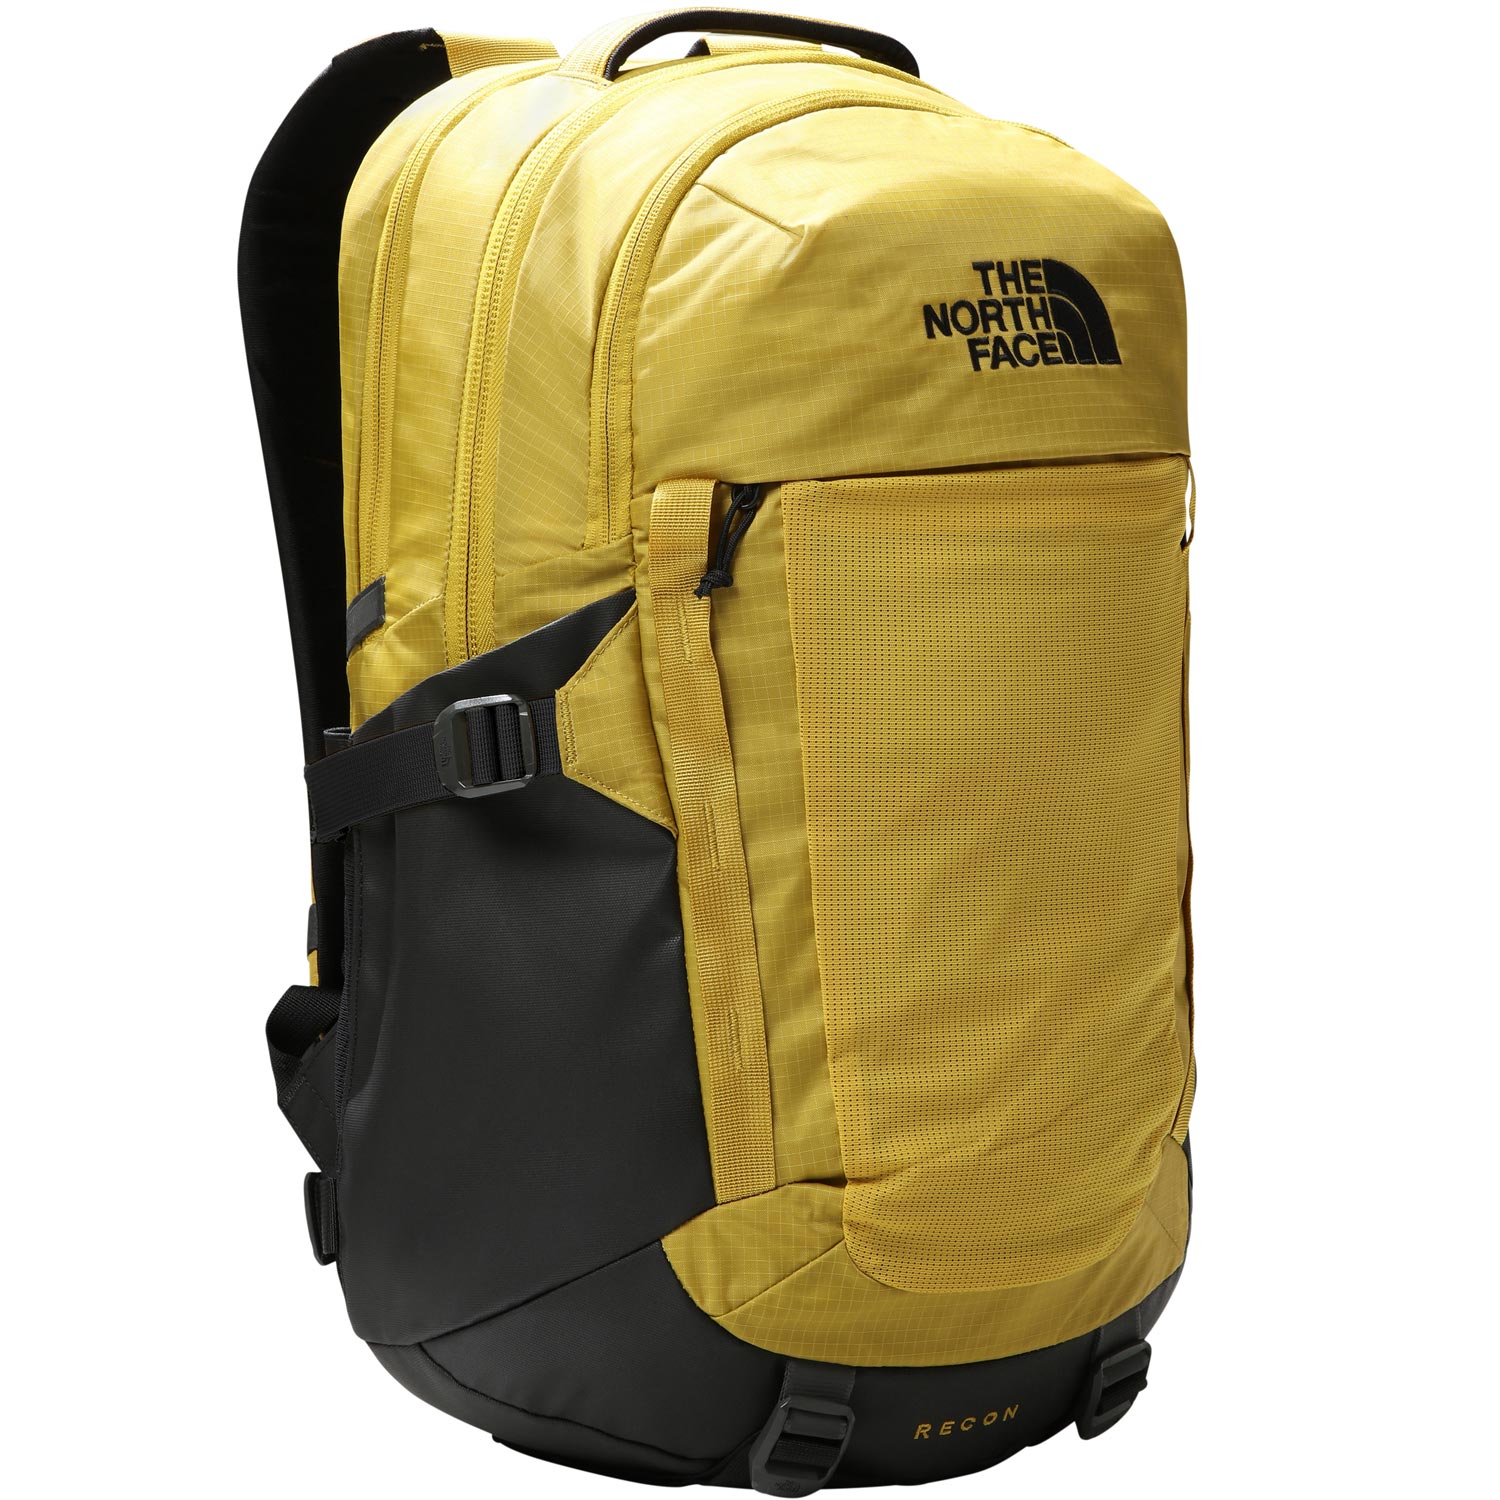 The North Face Laptoprucksack Recon mineral gold/black